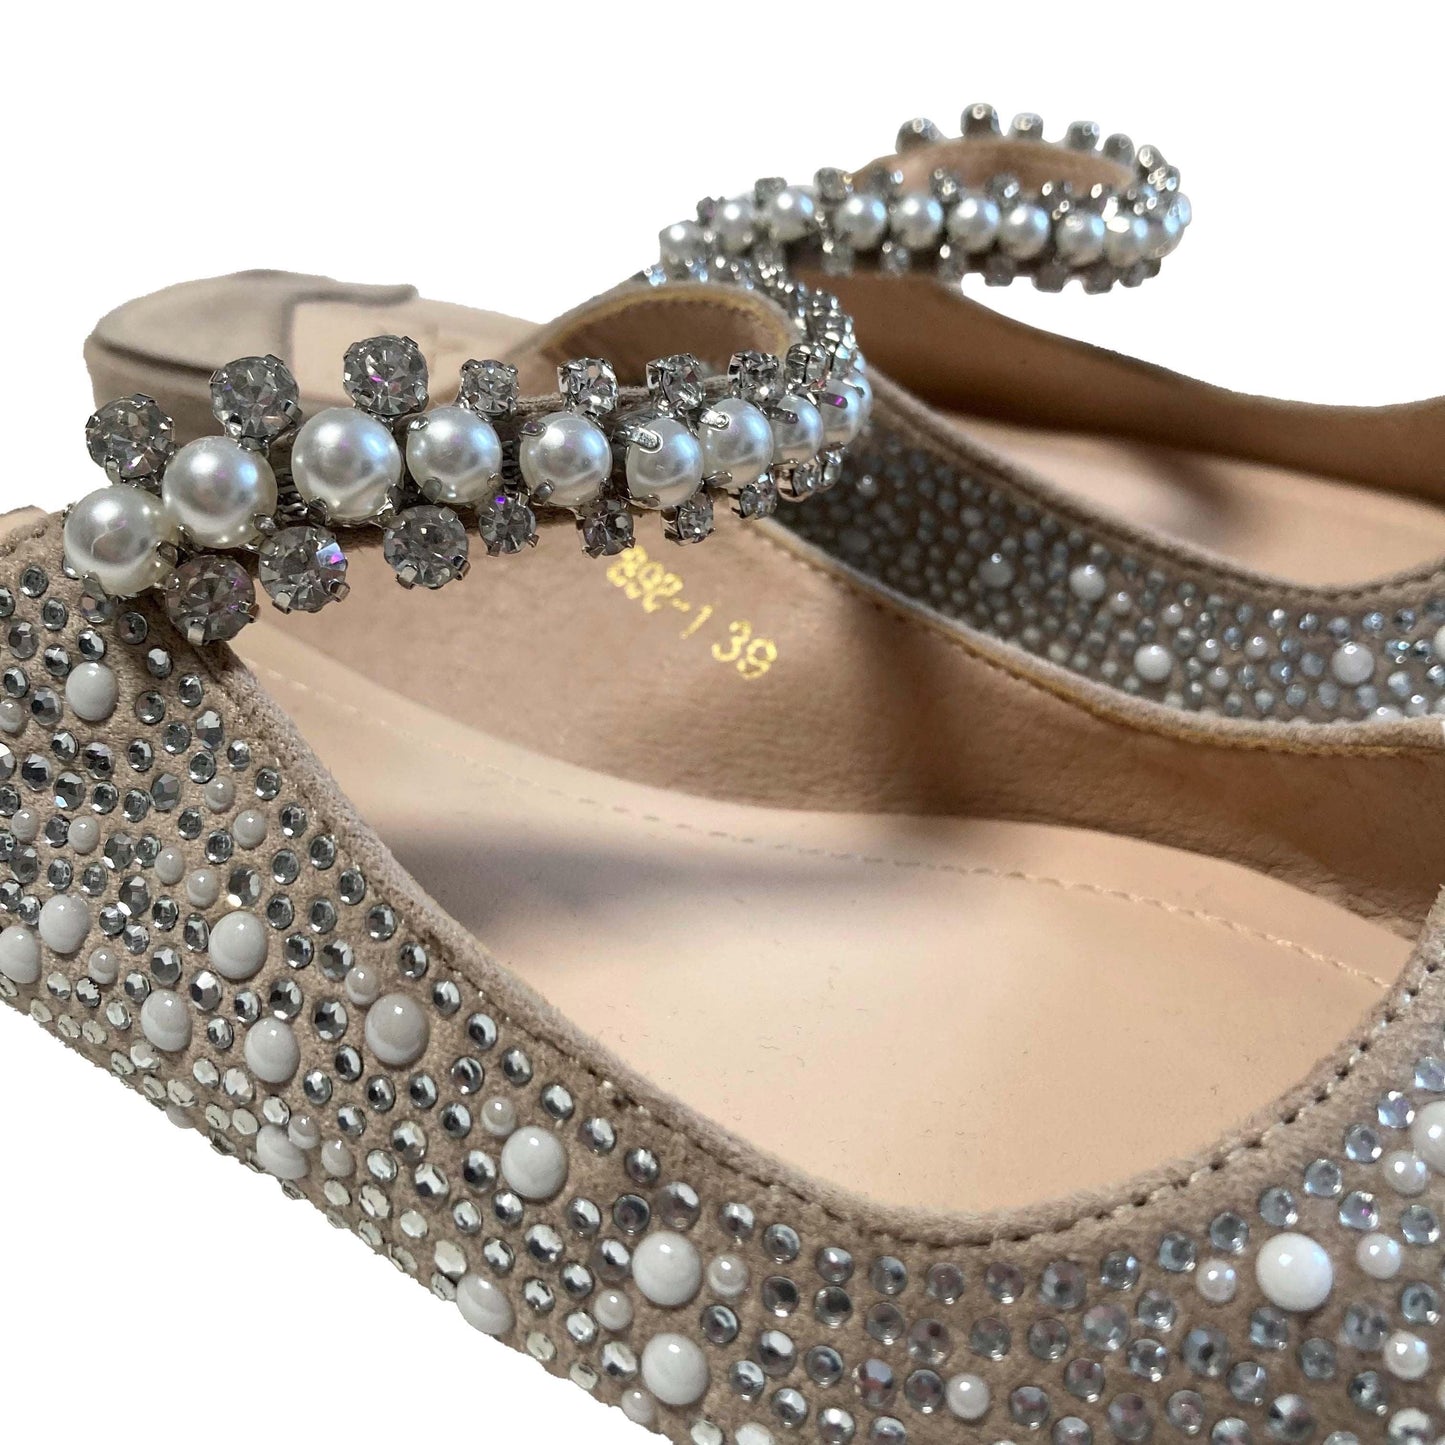 Grey flat shoes embellished with shiny pearls